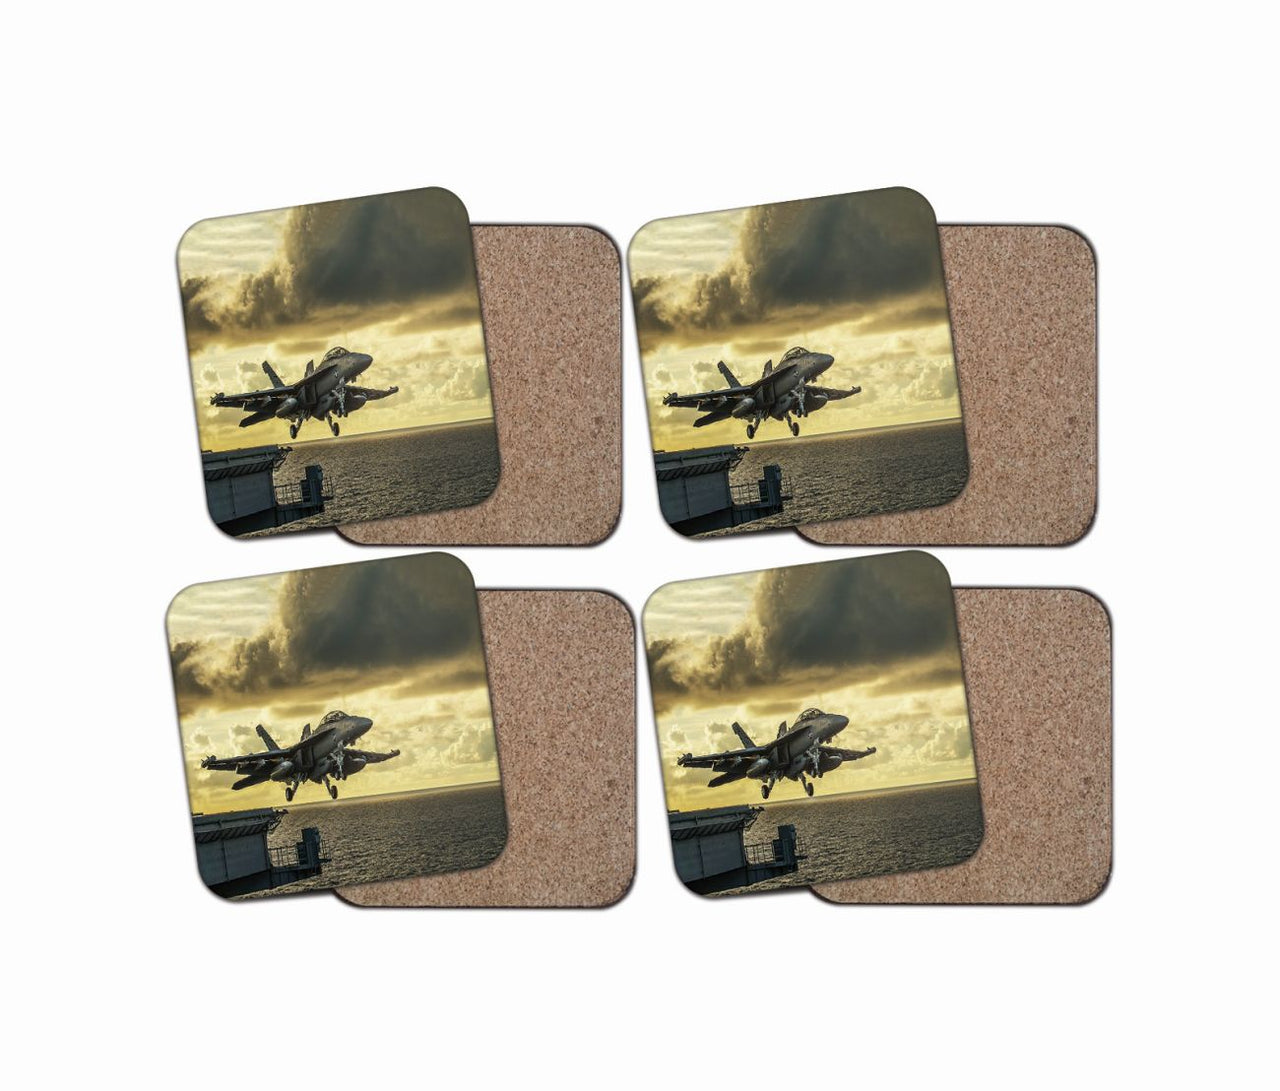 Departing Jet Aircraft Designed Coasters